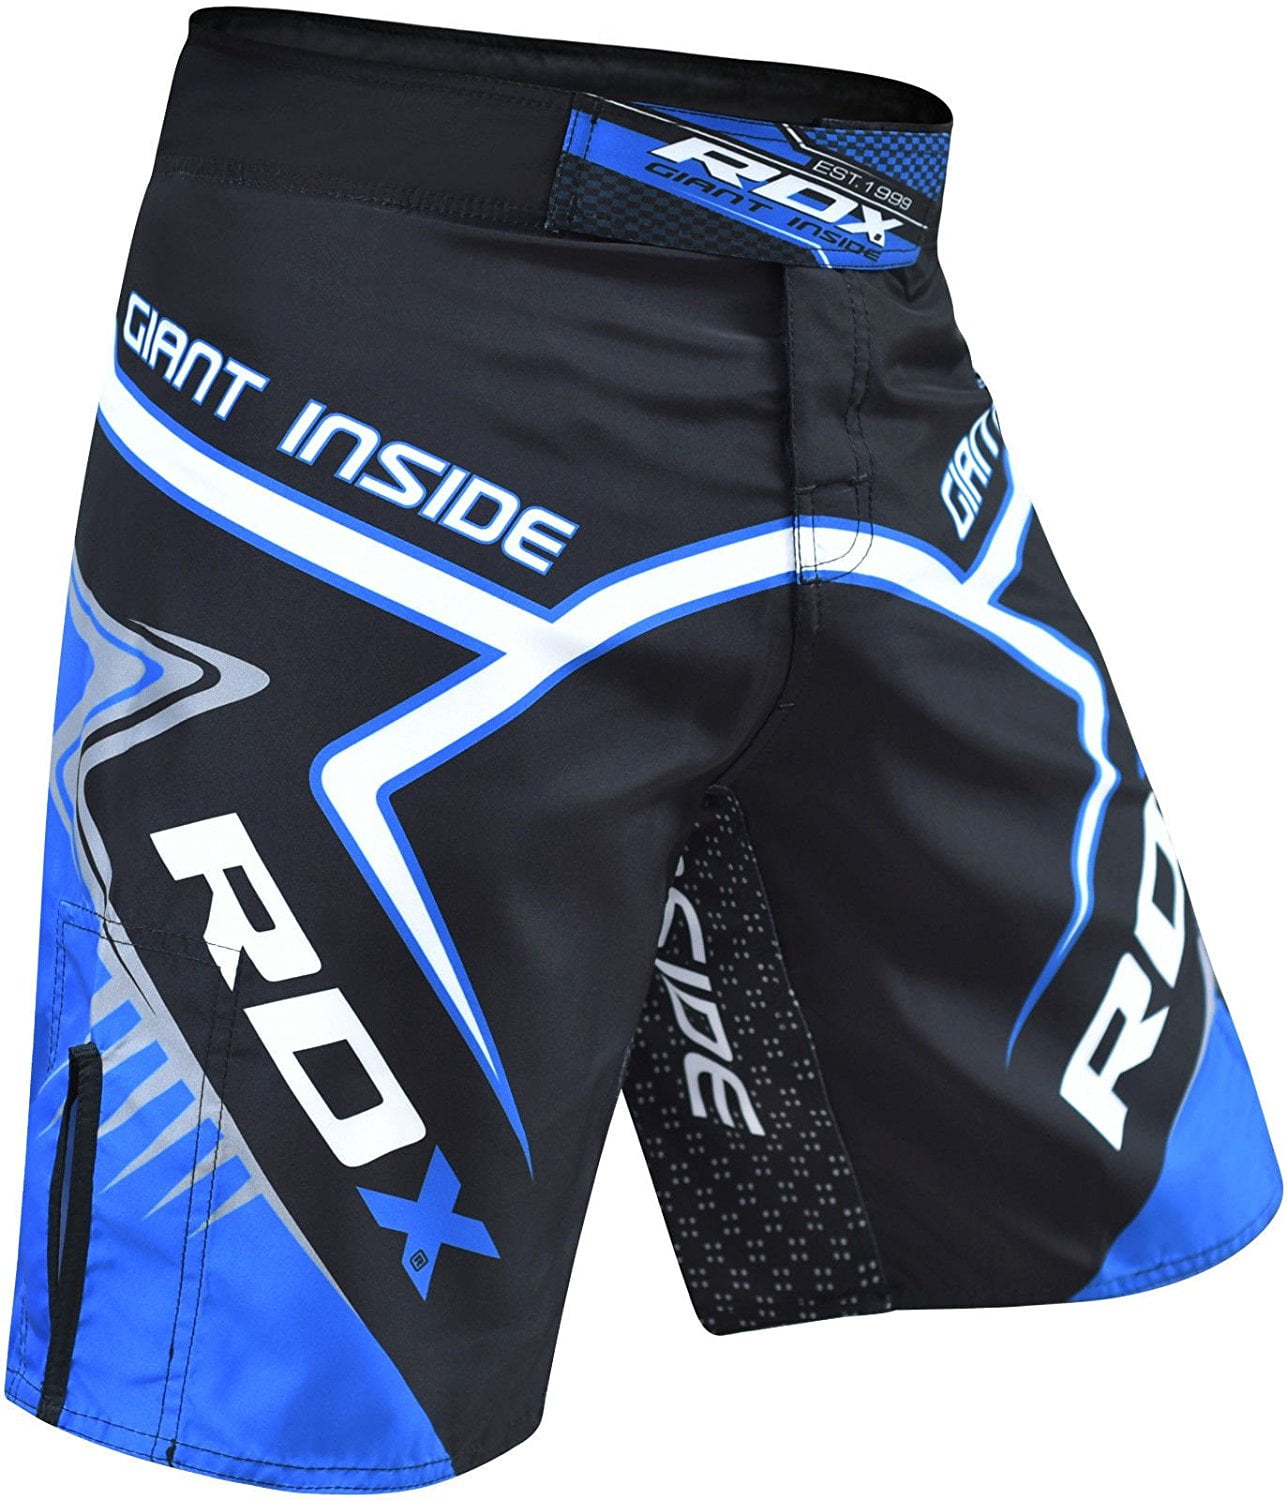 Mma Trunks Muay Thai Rdx Gym Grappling Sports Ufc Cage Kick Fight Boxing Shorts 